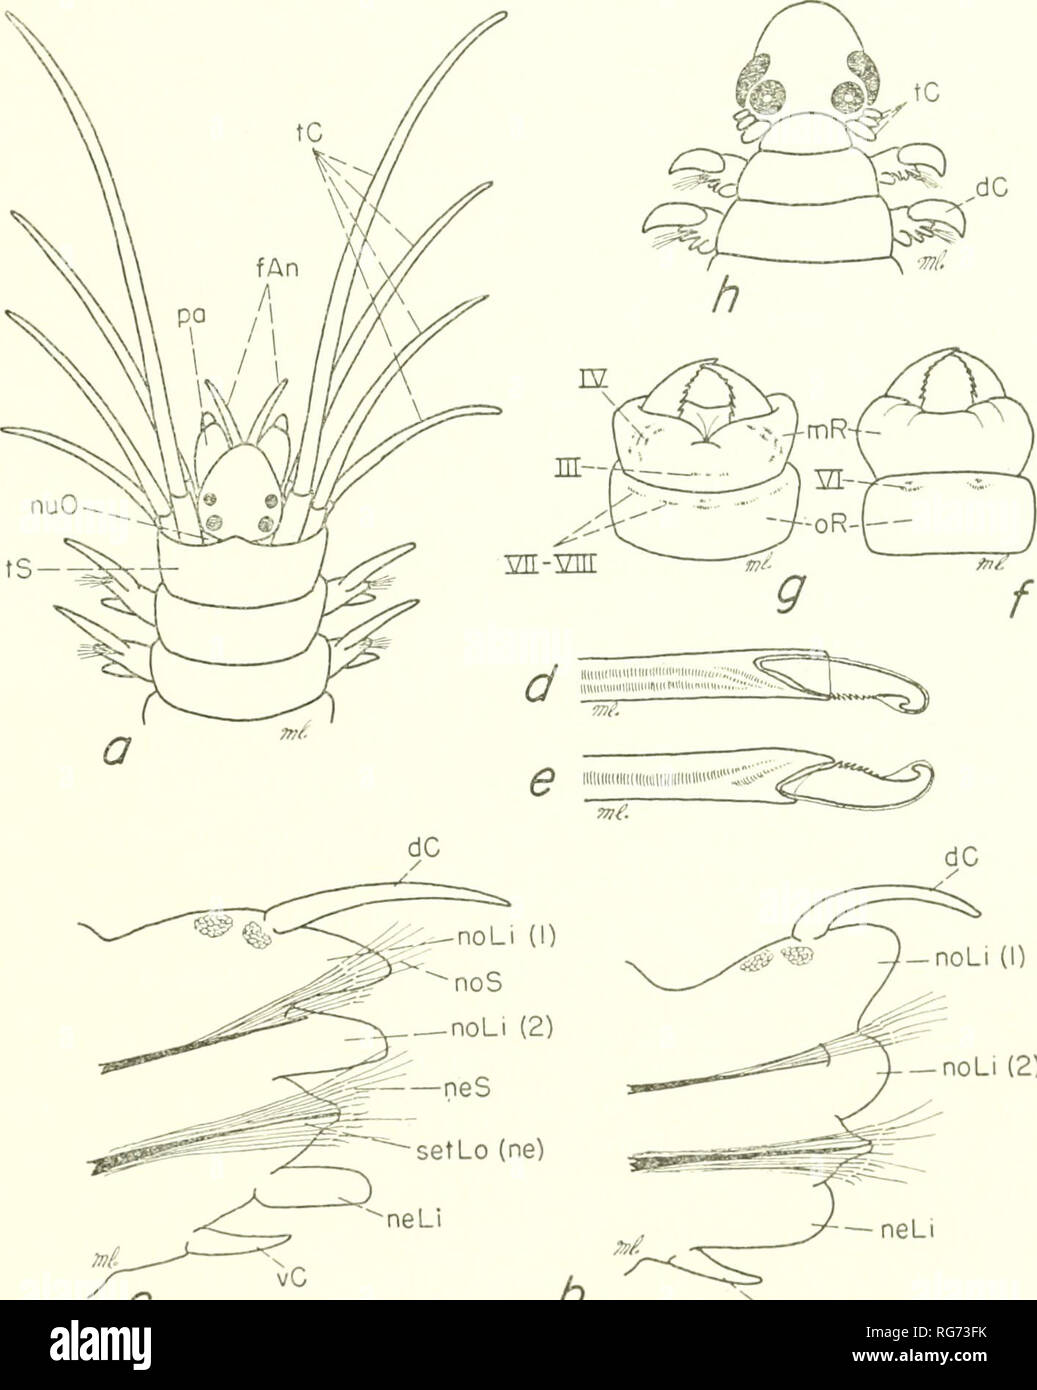 . Bulletin - United States National Museum. Science. POLYCHAETE WORMS, PART 1 155 Platynereis dumerilii Fauvel, 1923, p. 359, fig. 141,a-/; 1953, p. 218, fig. lll.a-/; 1955, p. 7; 1957a, p. 5; 1957b, p. 214.—Herpin, 1926, pp. 17, 39, 91, 112, 119.—Hartman, 1942a, p. 100; 1944a, p. 339, pi. 16, figs. 3, 7-8, pi. 23, fig. 2; 1944c, p. 17; 1945, p. 22; 1951, p. 47; 1956, p. 281.—Thorson, 1946, p. 67, fig. 31.—St0p-Bowitz, 1948a, p. 62.—Wesenberg-Lund, 1949, p. 288.—Day, 1953, p. 429; 1960, p. 324.—Andrevv- and Andrew, 1953, p. 9.—Rasmussen, 1956, p. 59.—Southward, 1956, p. 263.—Allen, 1957, p. 52 Stock Photo